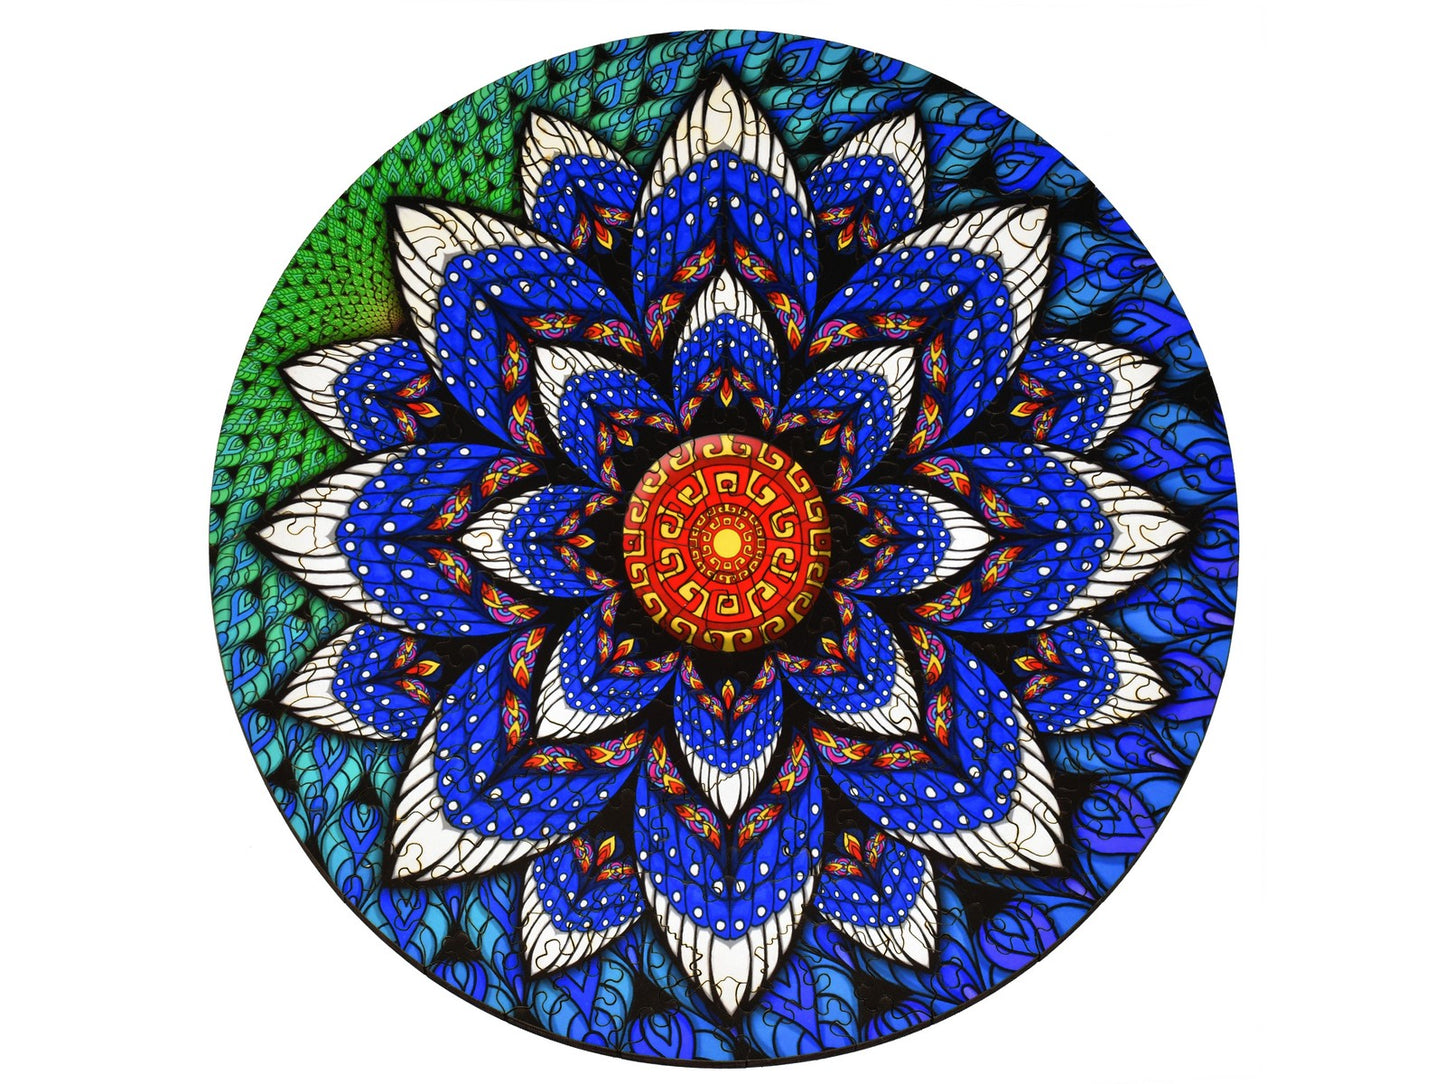 The front of the puzzle, Magpie, which shows a colorful abstract mandala with feathers.